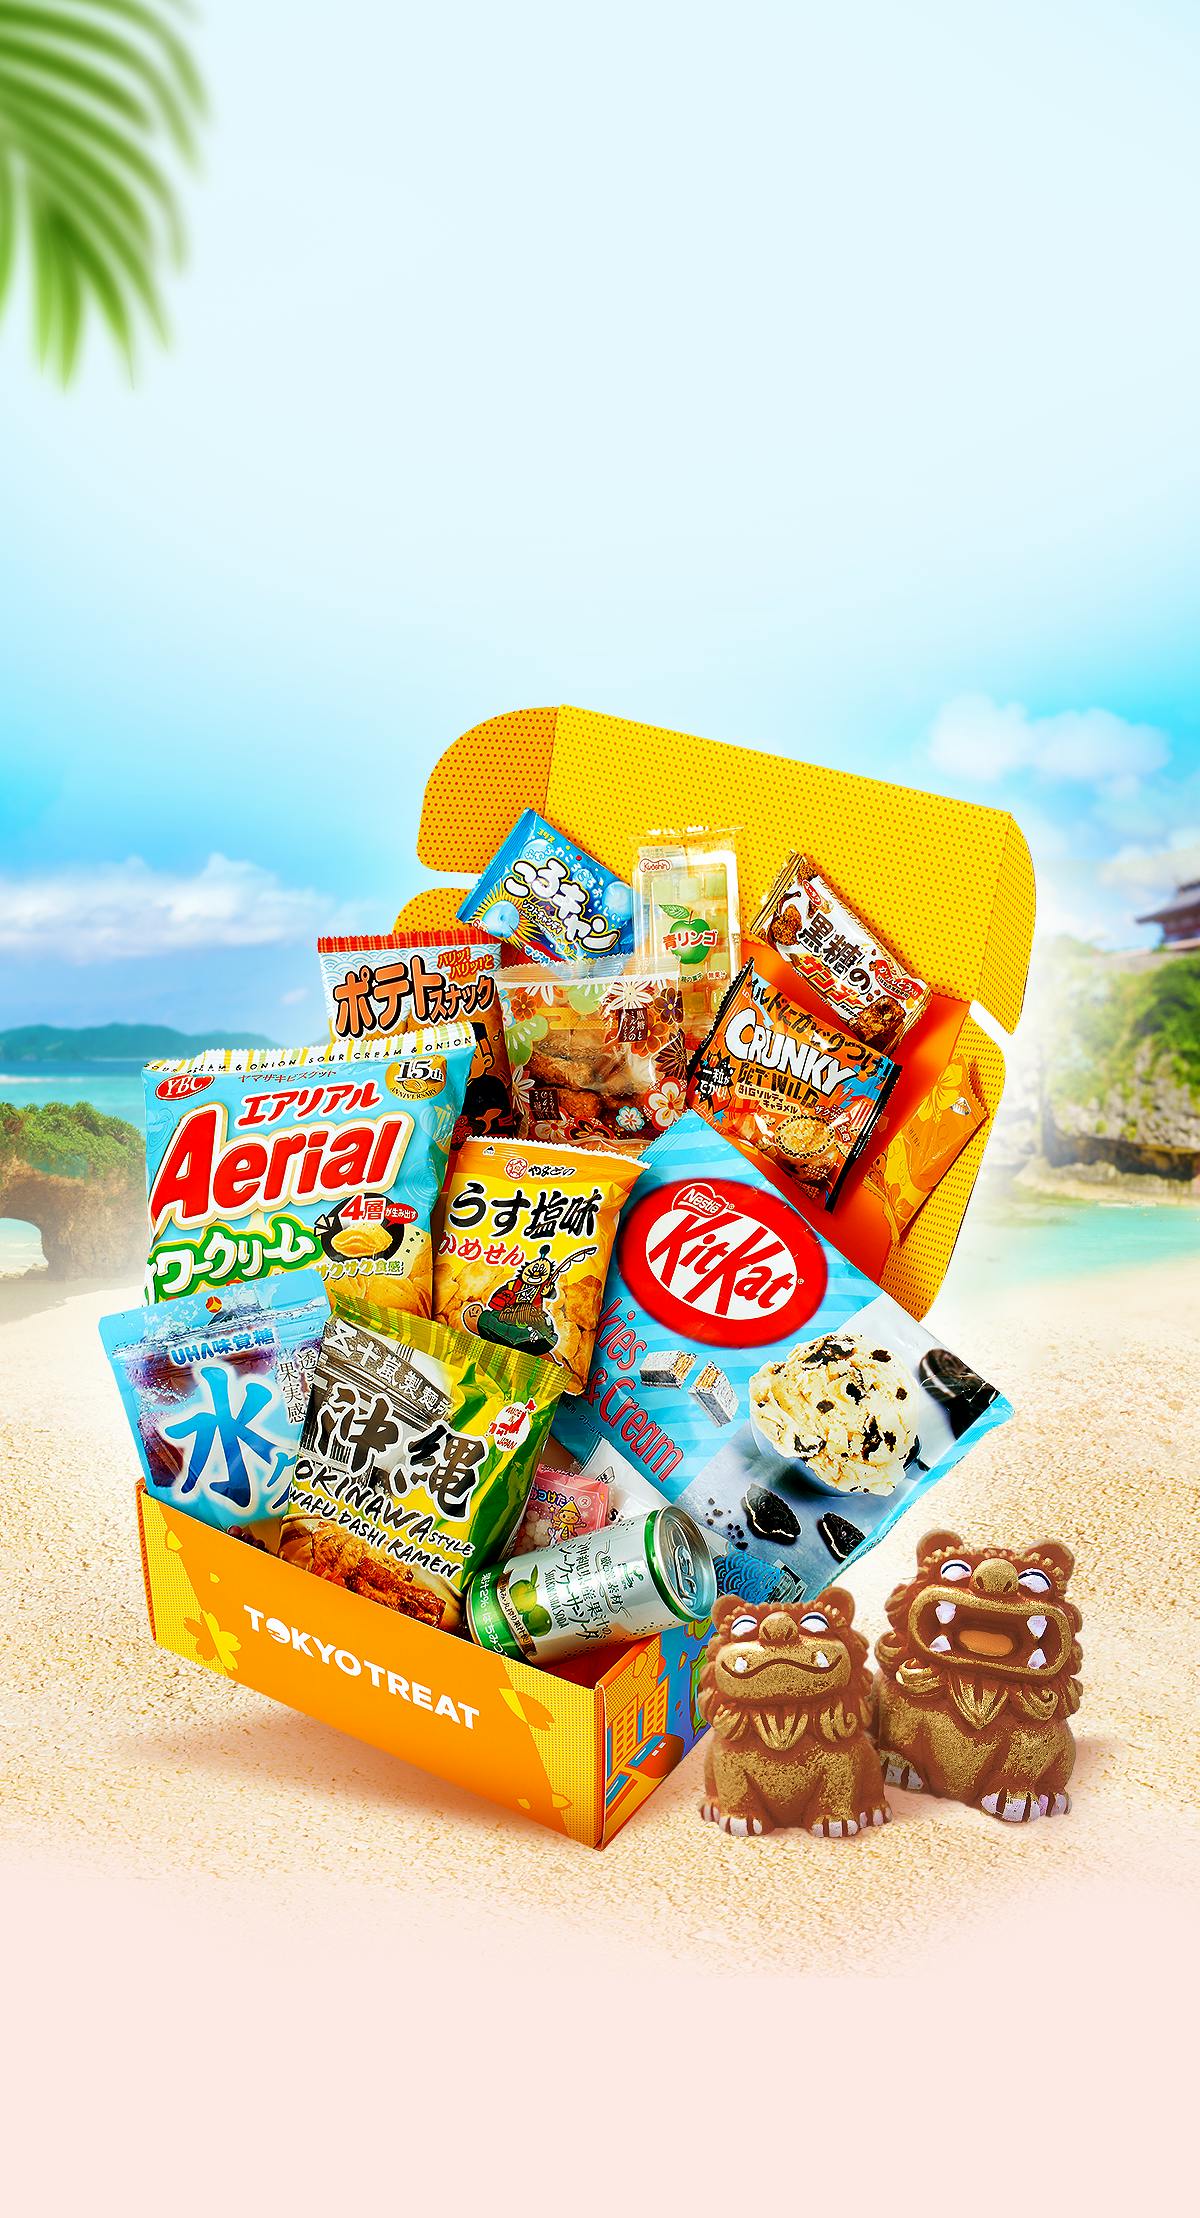 The TokyoTreat box sits against a backdrop of a beach in Okinawa, with an Okinawan castle and beach elements in the distance.